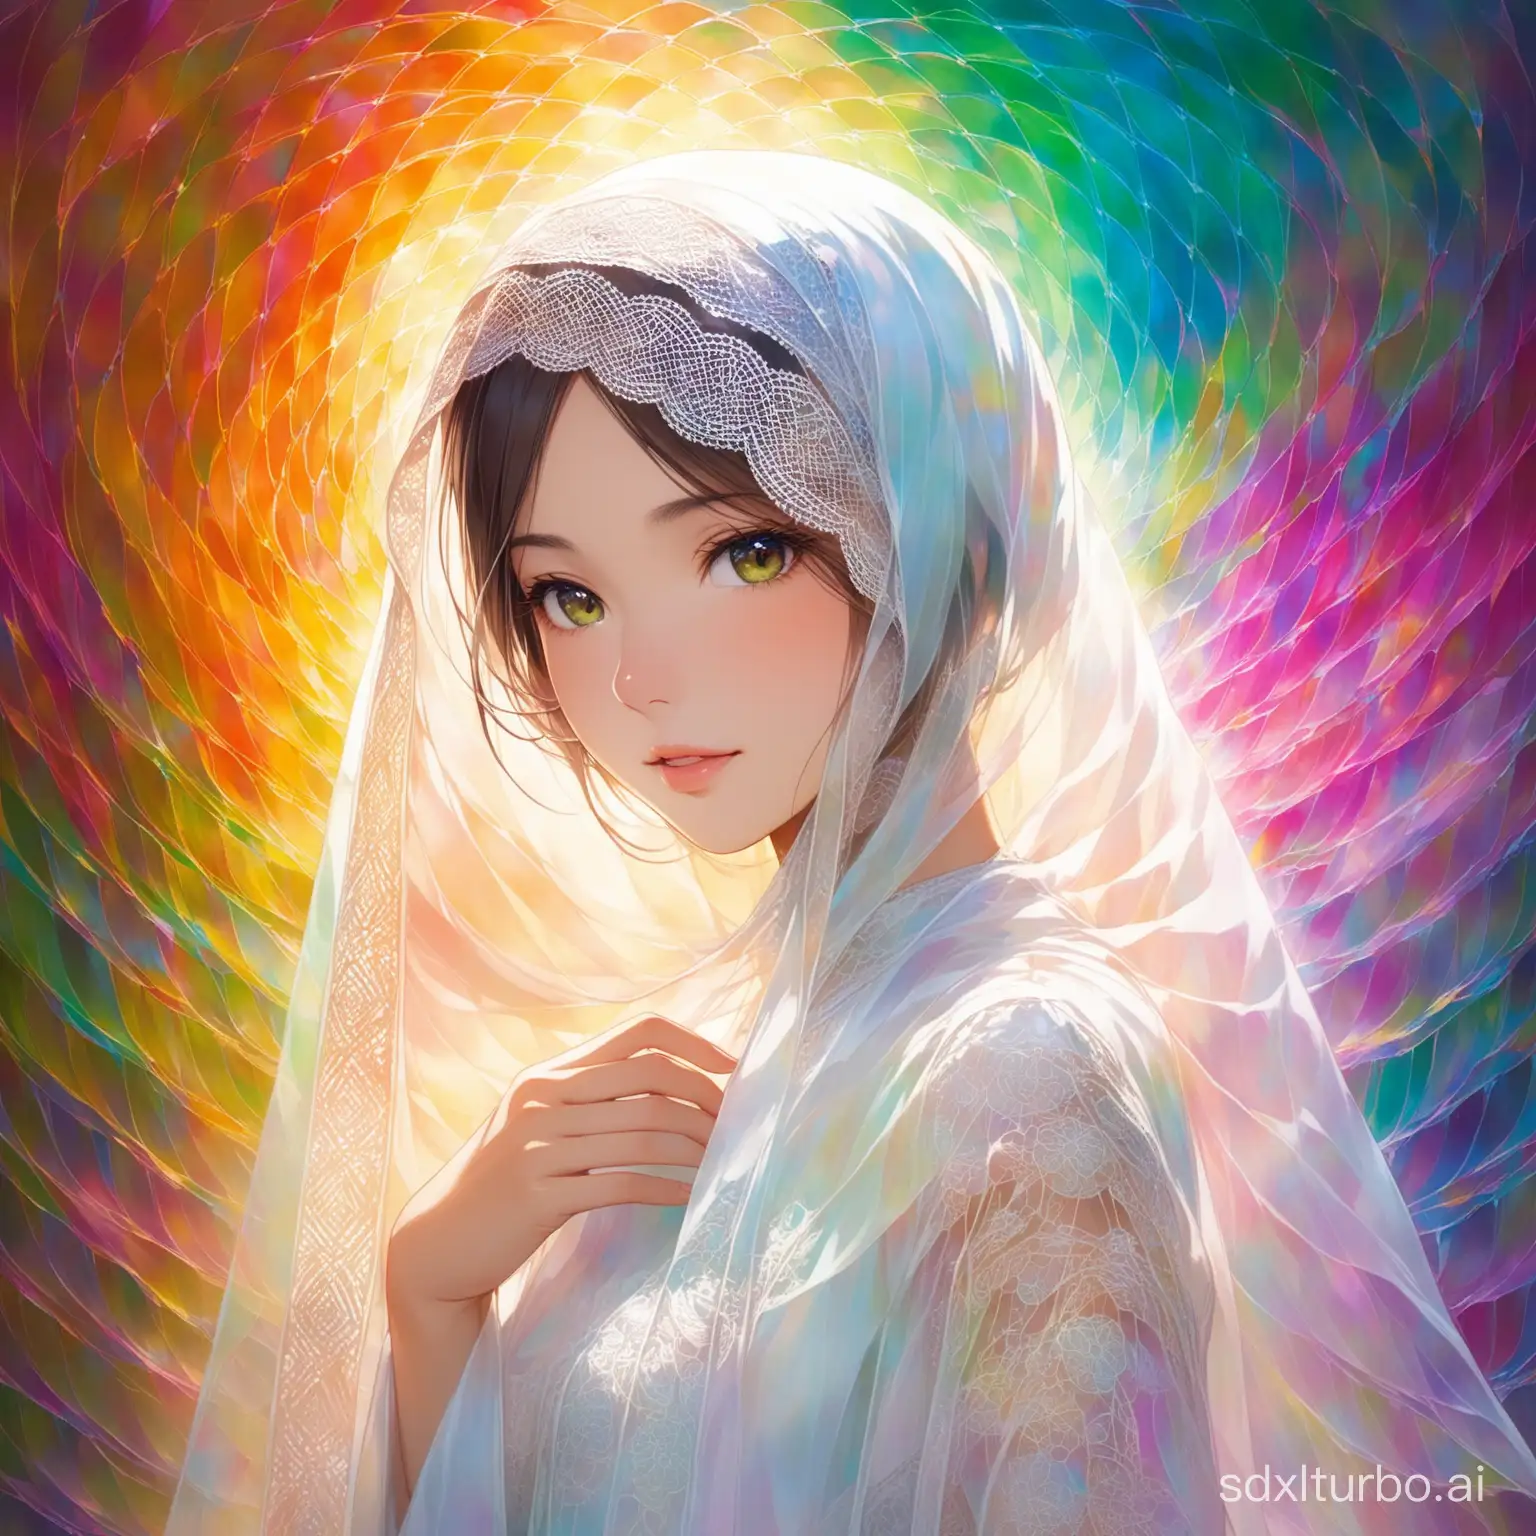 Picture full of stories,single exposure, close-up, a white image shows a Asian girl covering herself with Hijaab during the mont of Ramadan, in the style of soft focus romanticism, fashion bazaar stvle artwork by haruna kikuchi clean.translucent abstraction creation, uhd image close up, van mcginlevayered fiber style color veil printing, mike Campau, a touch of white powder. The Art of Light Painting, Stephen Shortridge. Ilfords FX. Colorful arrangement. avant-garde design